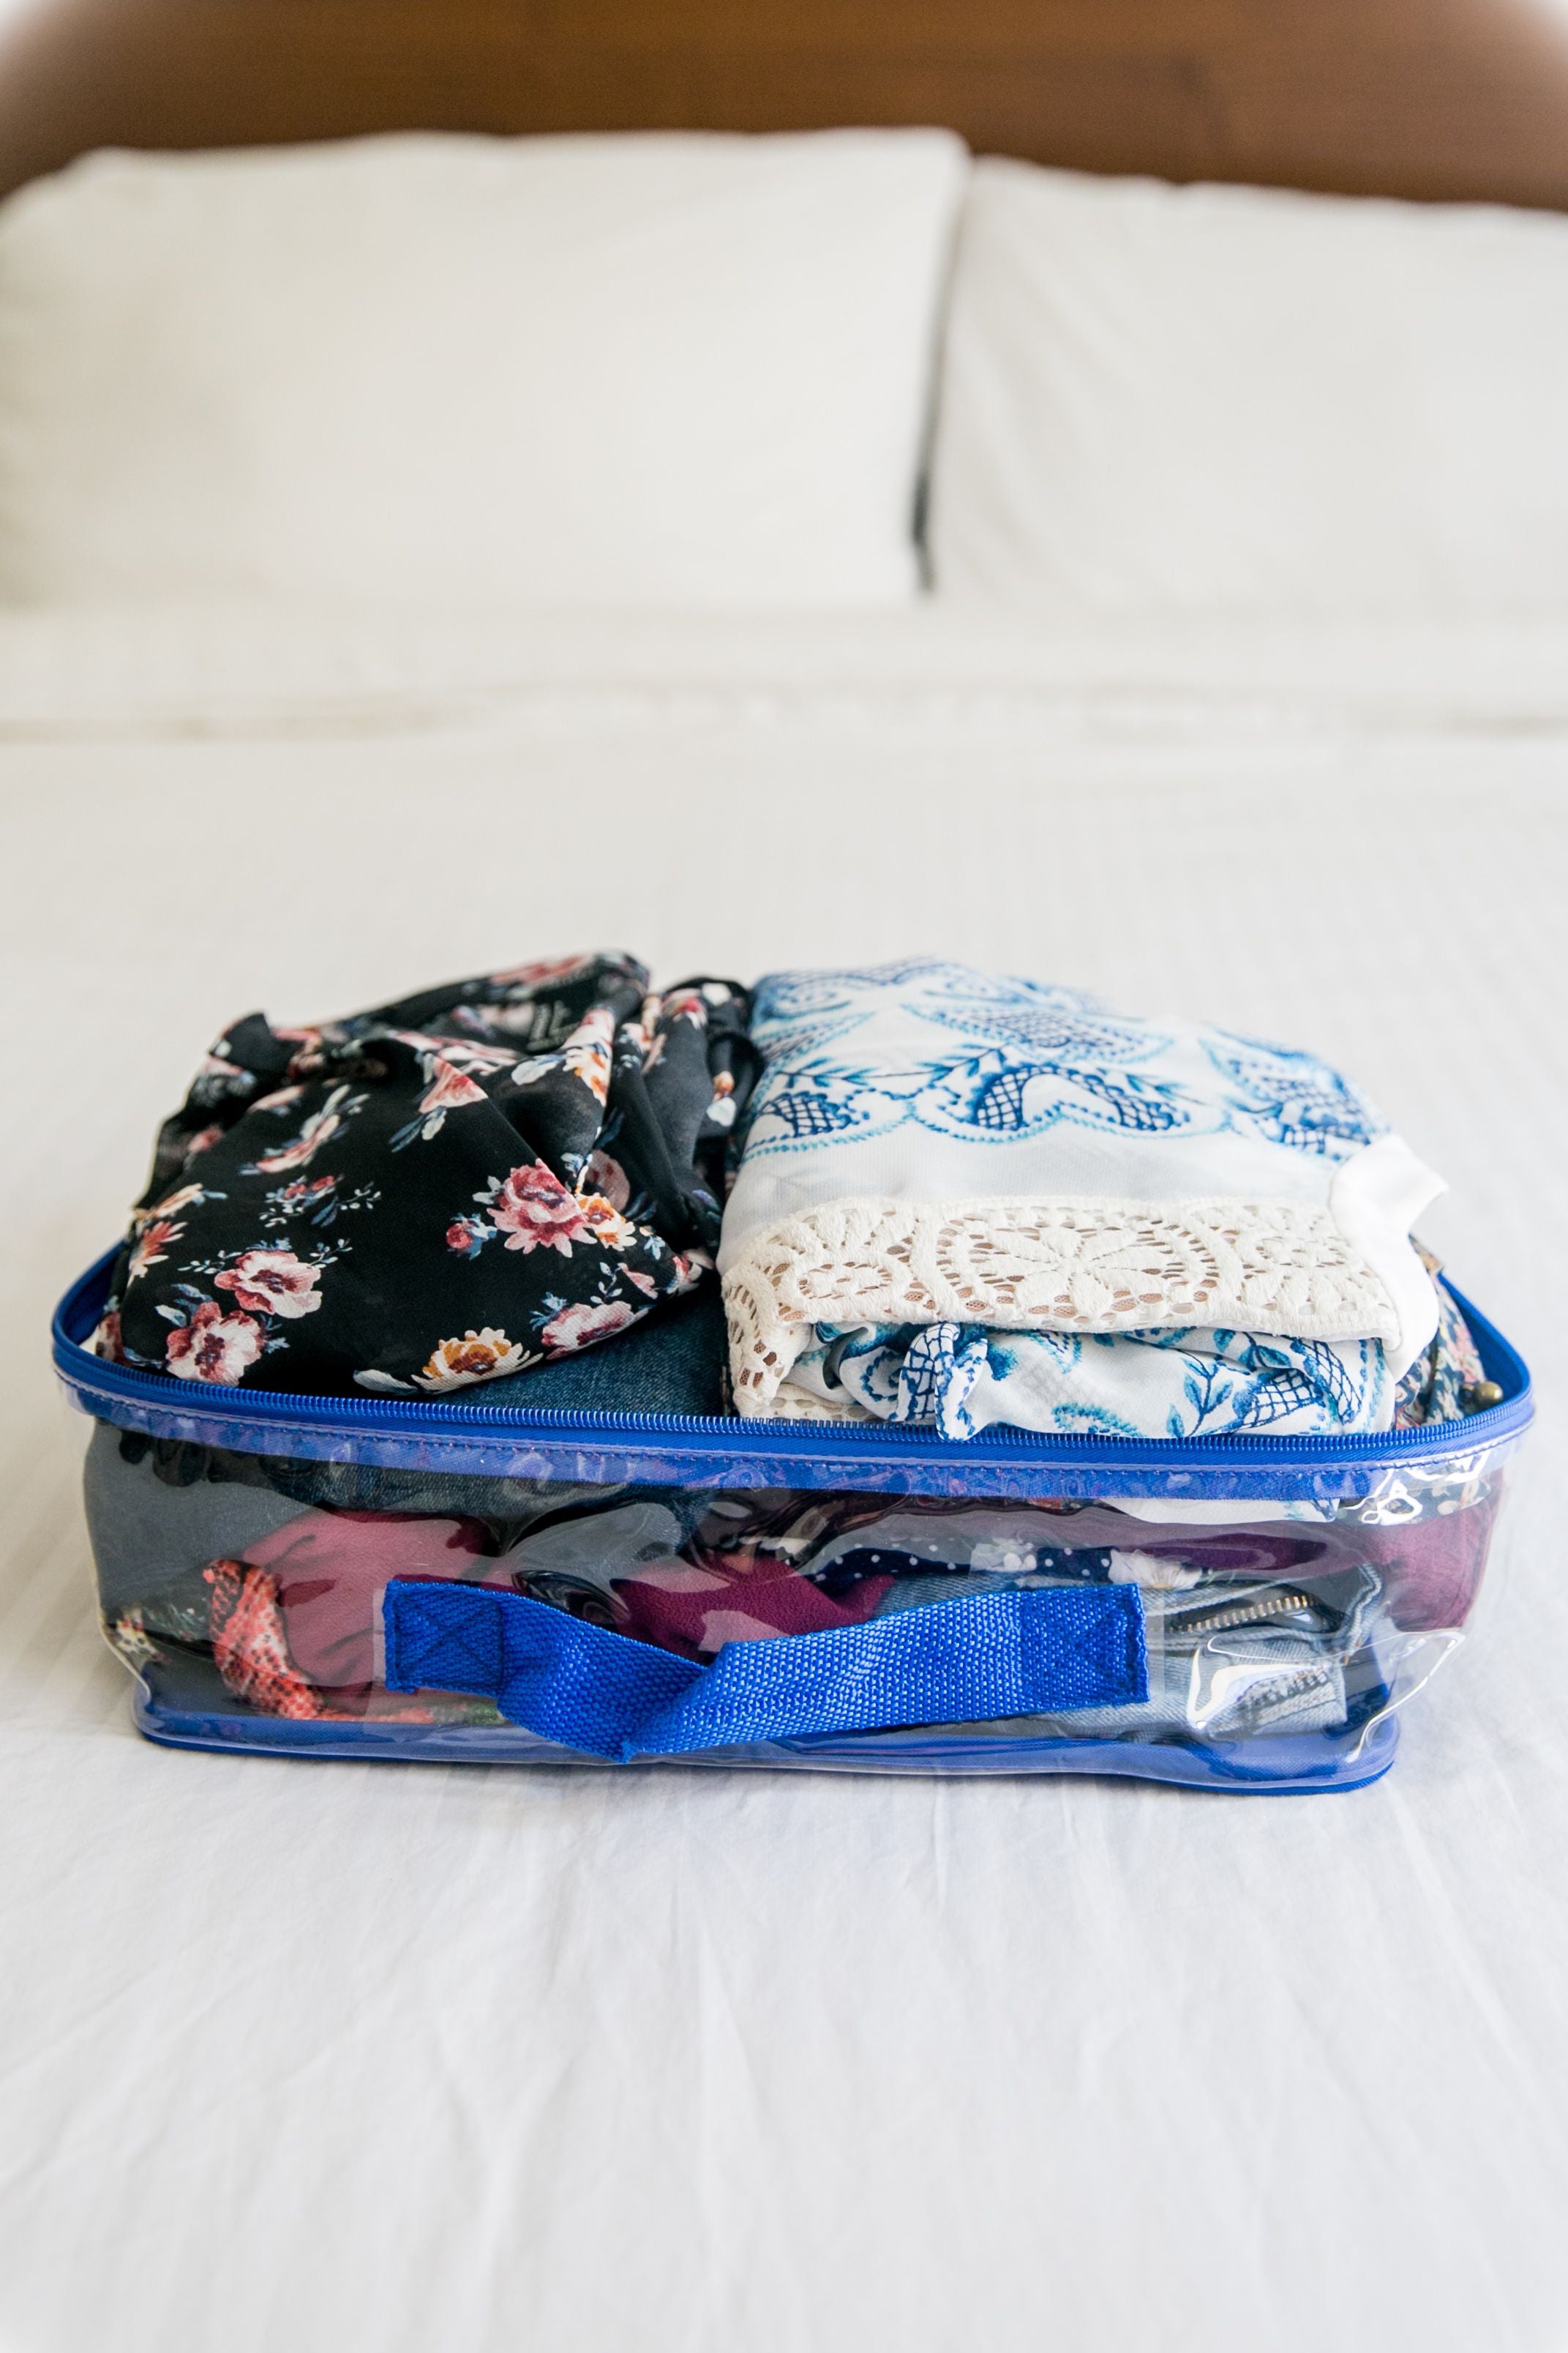 Overnight trip outfits packed in royal blue cube